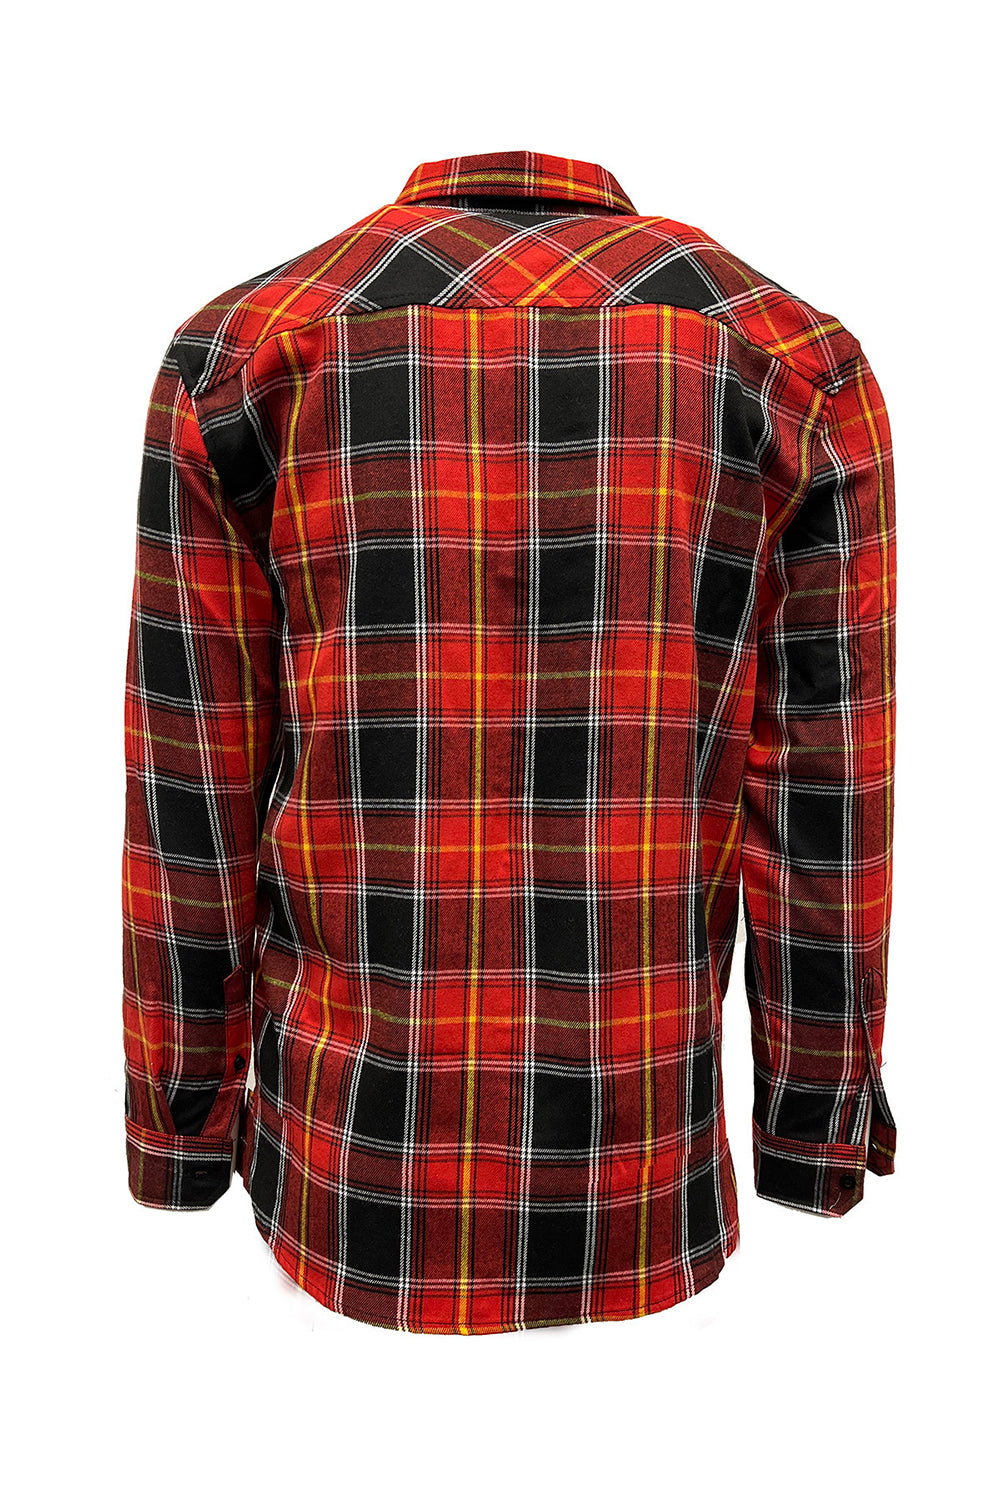 Burnside B8220 Mens Perfect Flannel Long Sleeve Button Down Shirt w/ Double Pockets Fire Red/Black Flat Back